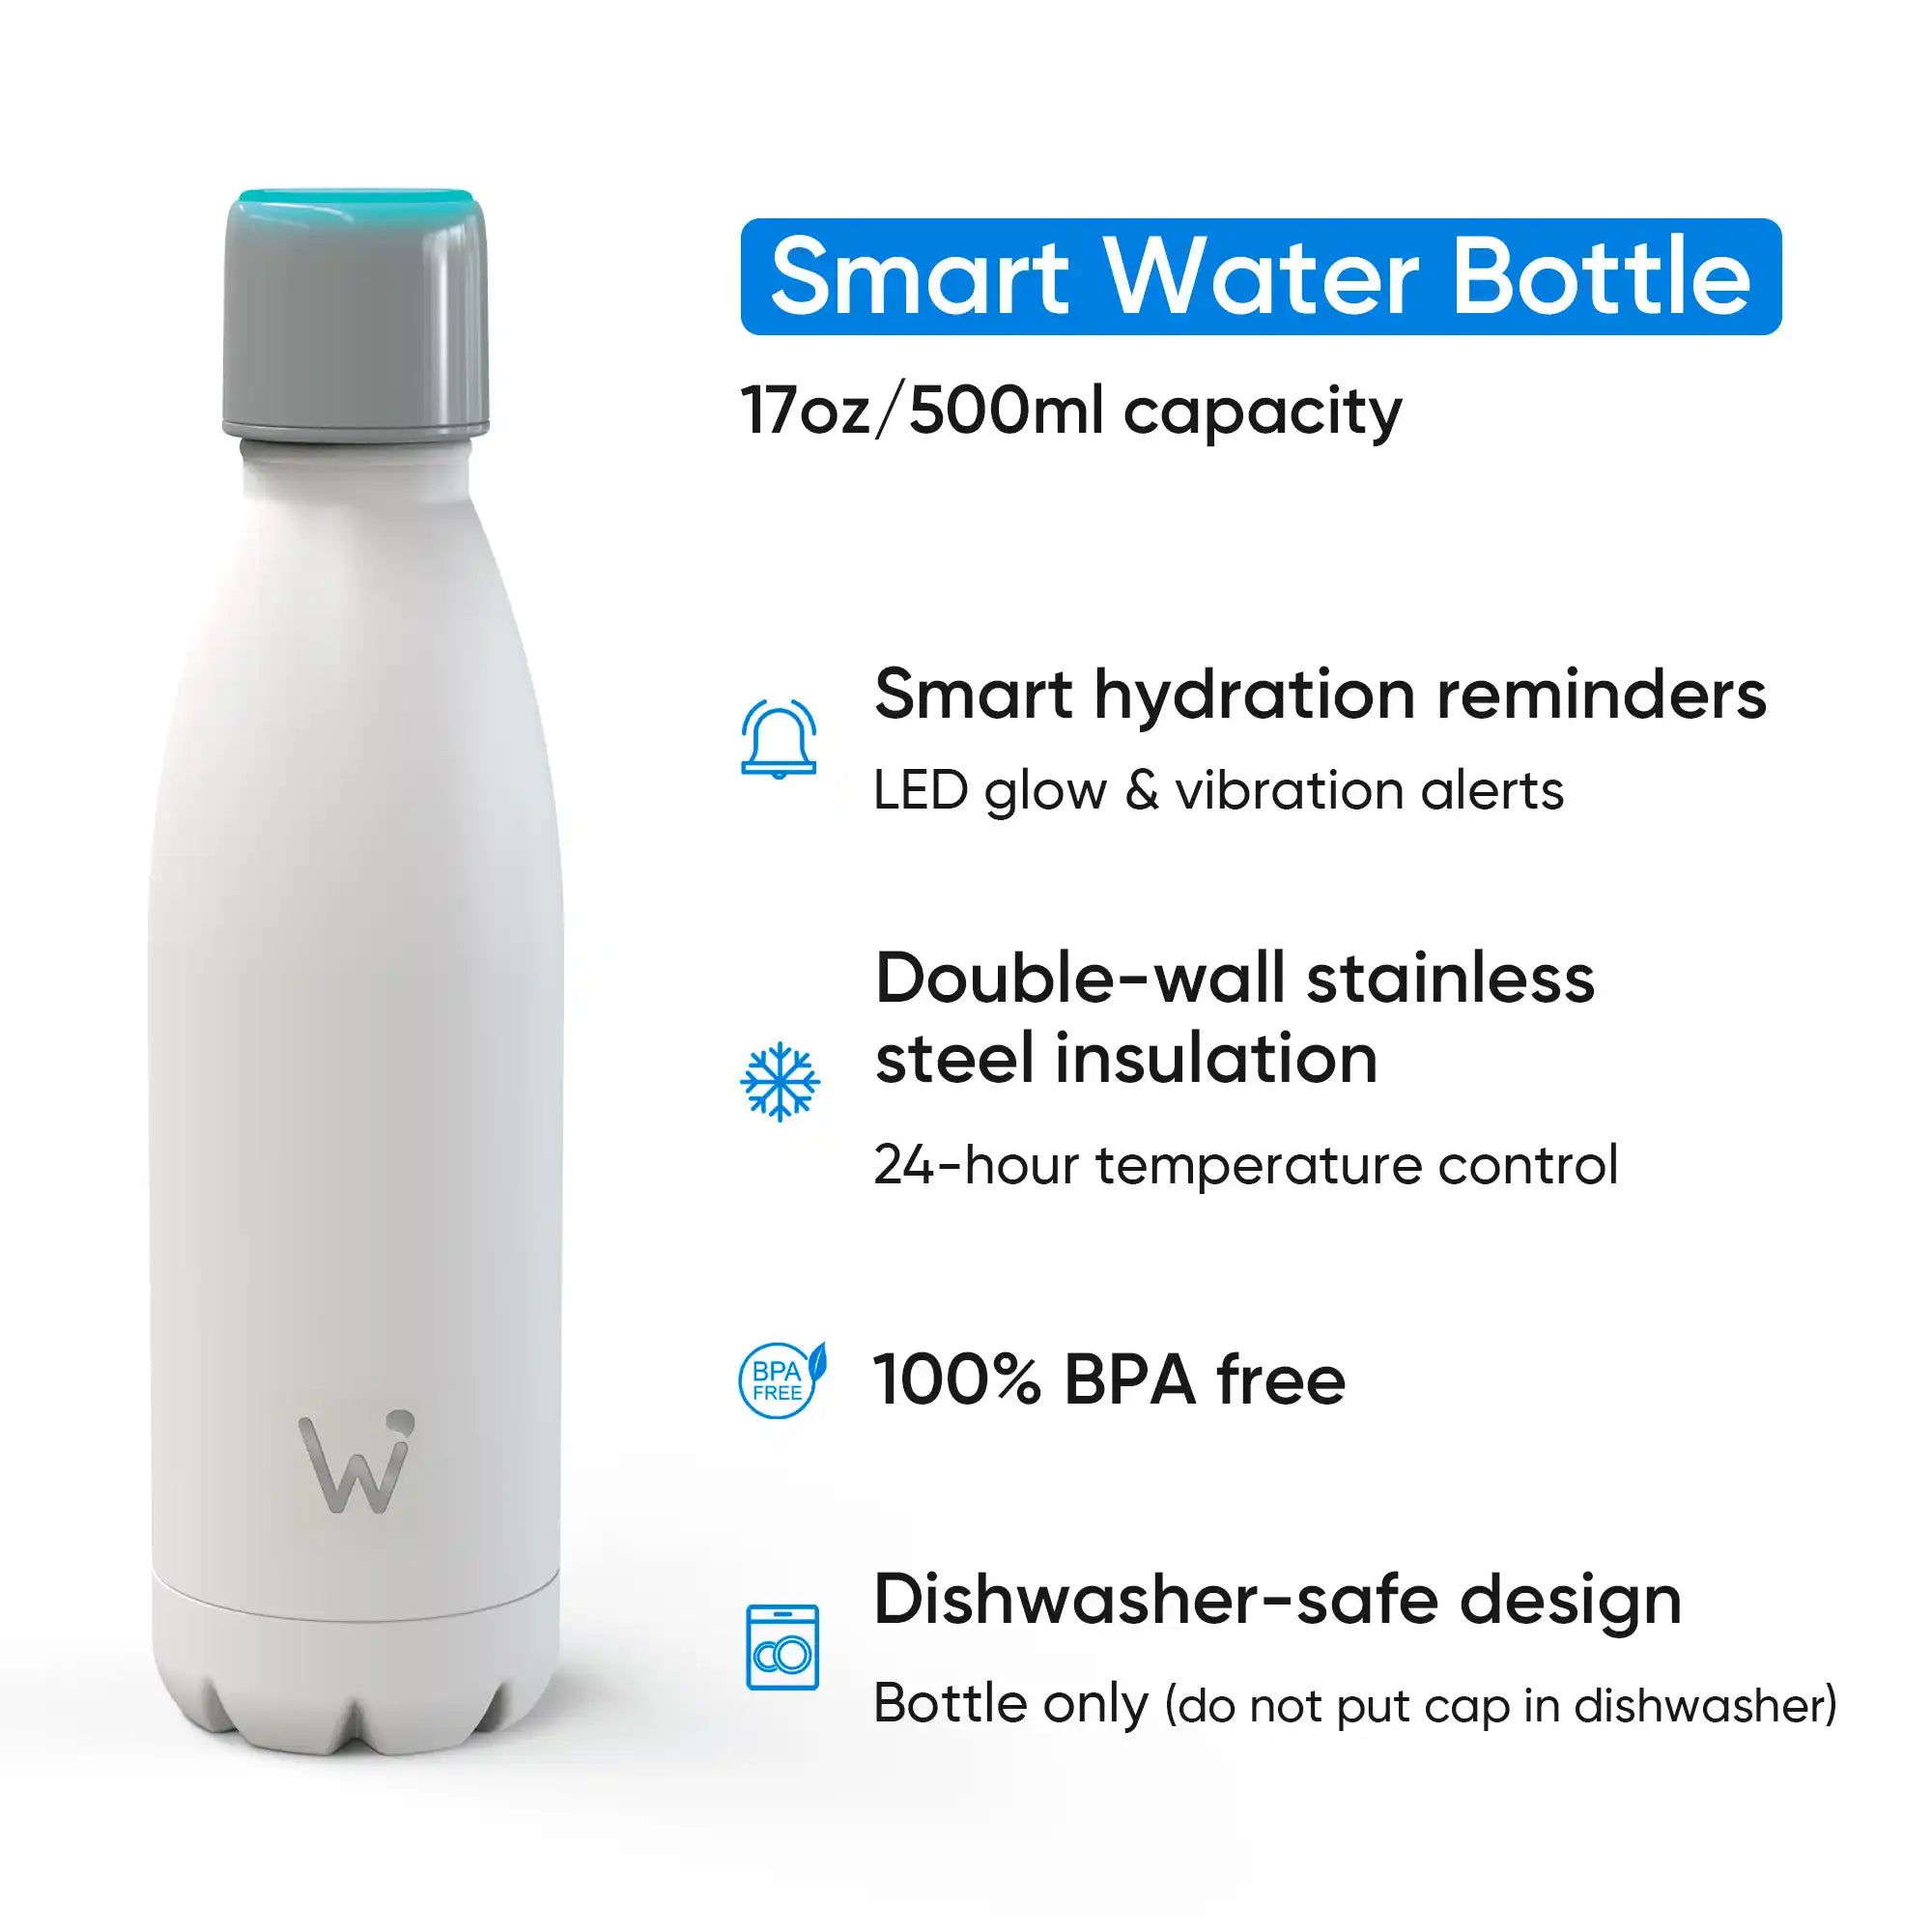 Smart Water Bottle has a 17oz/500ml capacity. LED glows and vibrations deliver hydration reminders. Double-wall stainless steel insulation keeps your drink cold for 24-hours. 100% BPA Free. The bottle is dishwasher safe. Hand wash smart cap. 